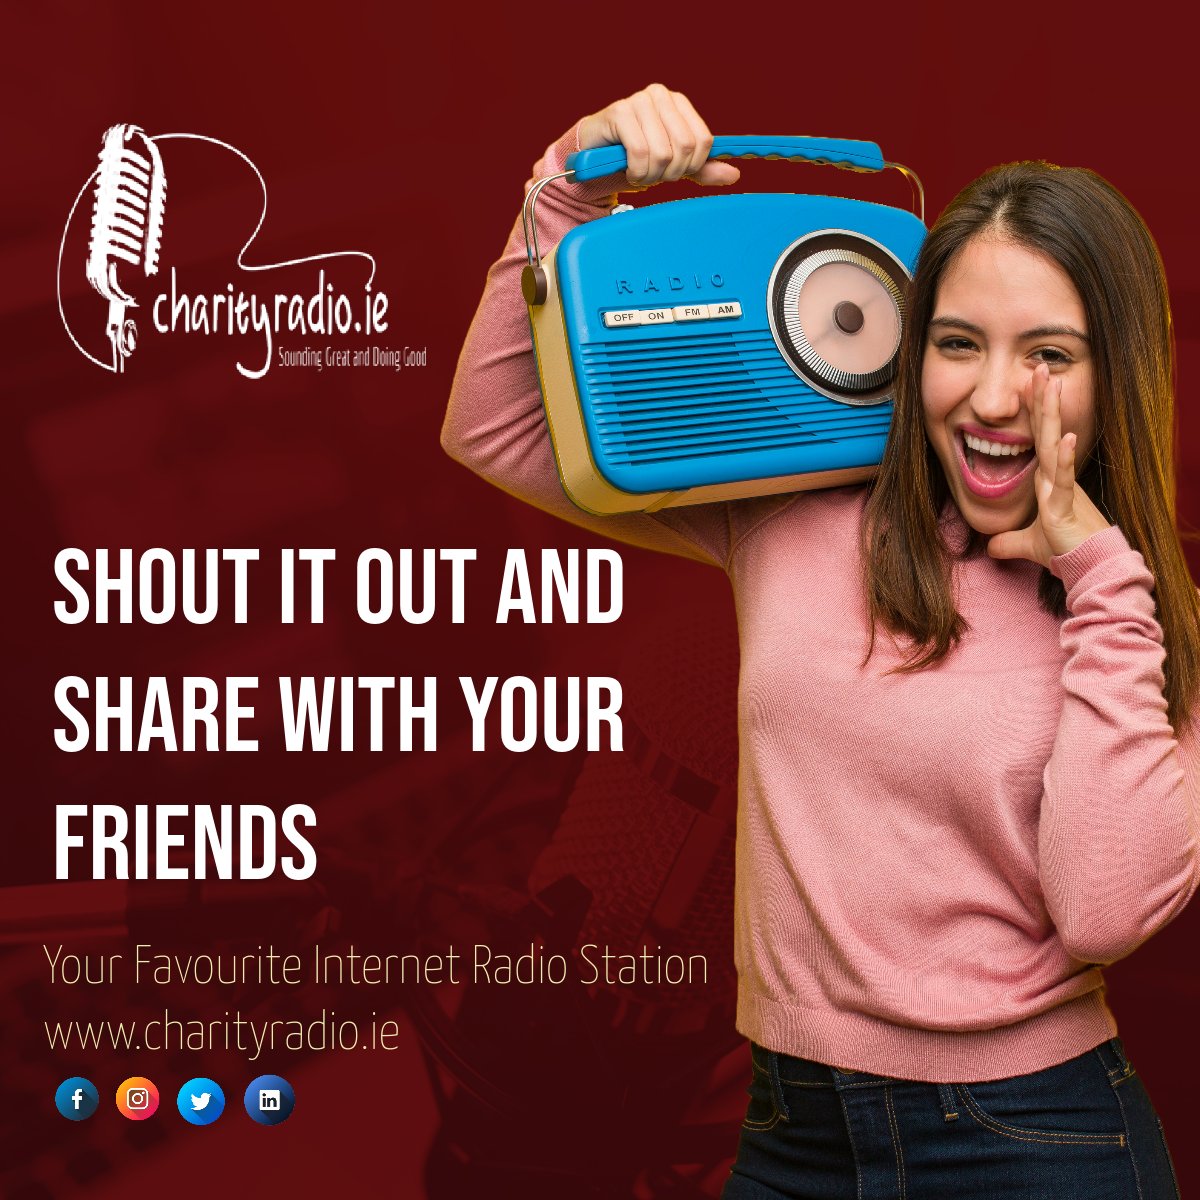 Shout it out and share it with your friends. Your Favourite internet radio station charityradio.ie Sounding Great and Doing Good #Charityradio #InternetRadio